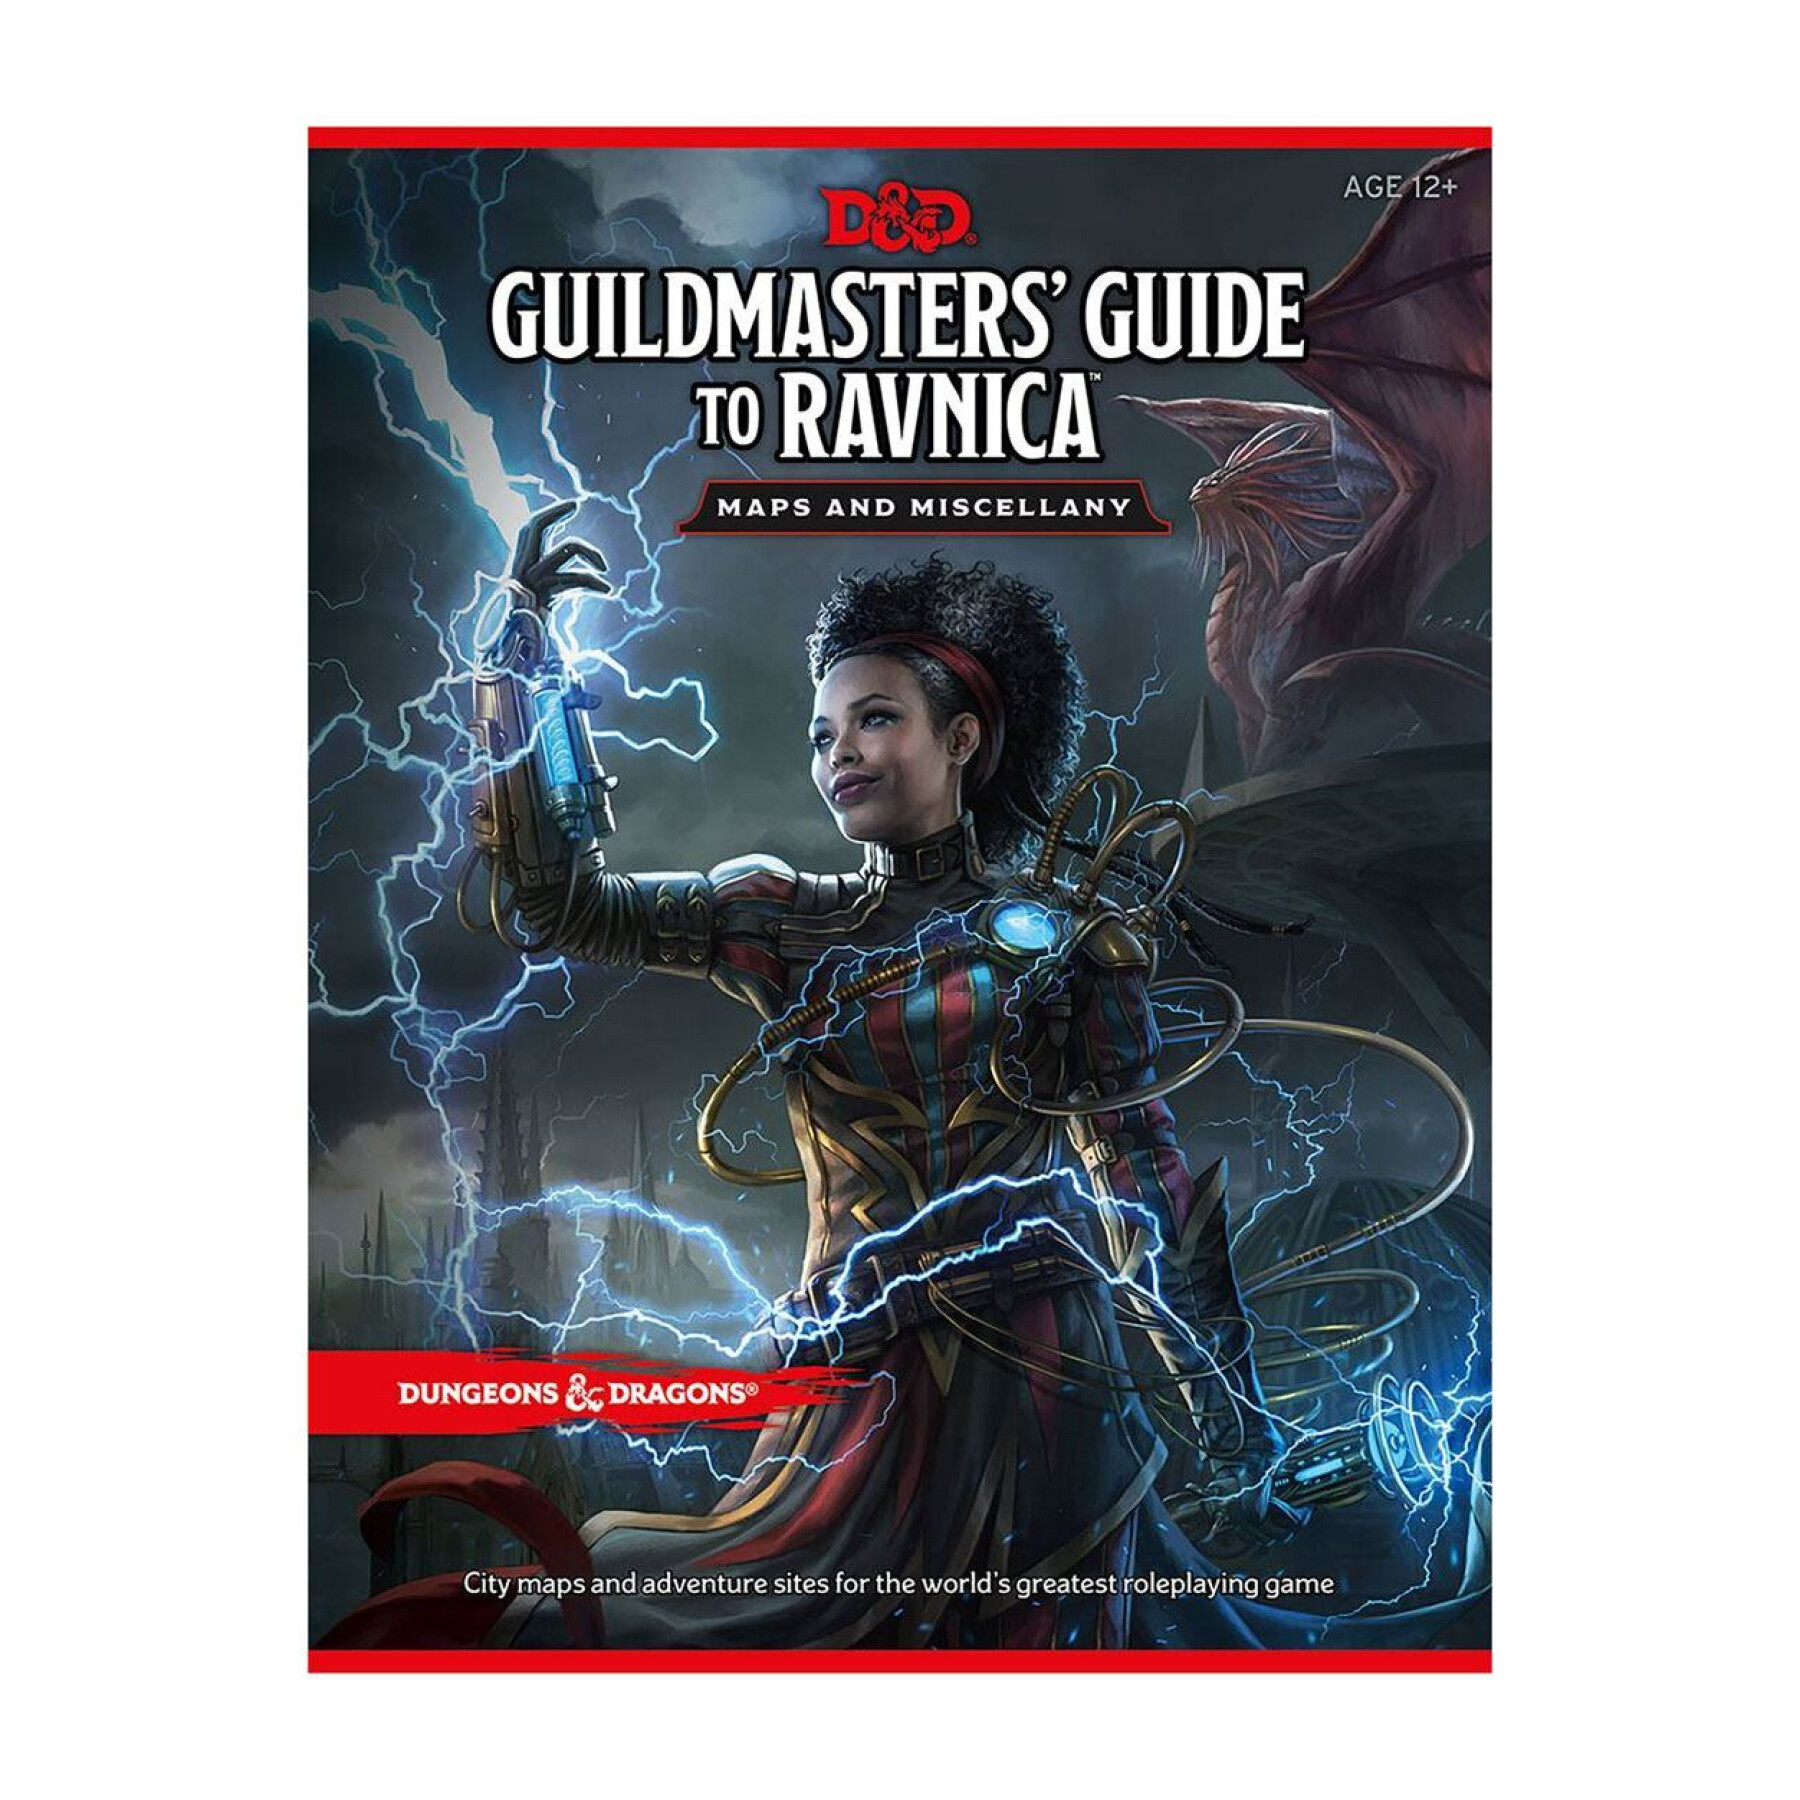 Board games guildmasters' guide to ravnica maps and miscellany Wizards of the Coast Dungeons et Dragons RPG